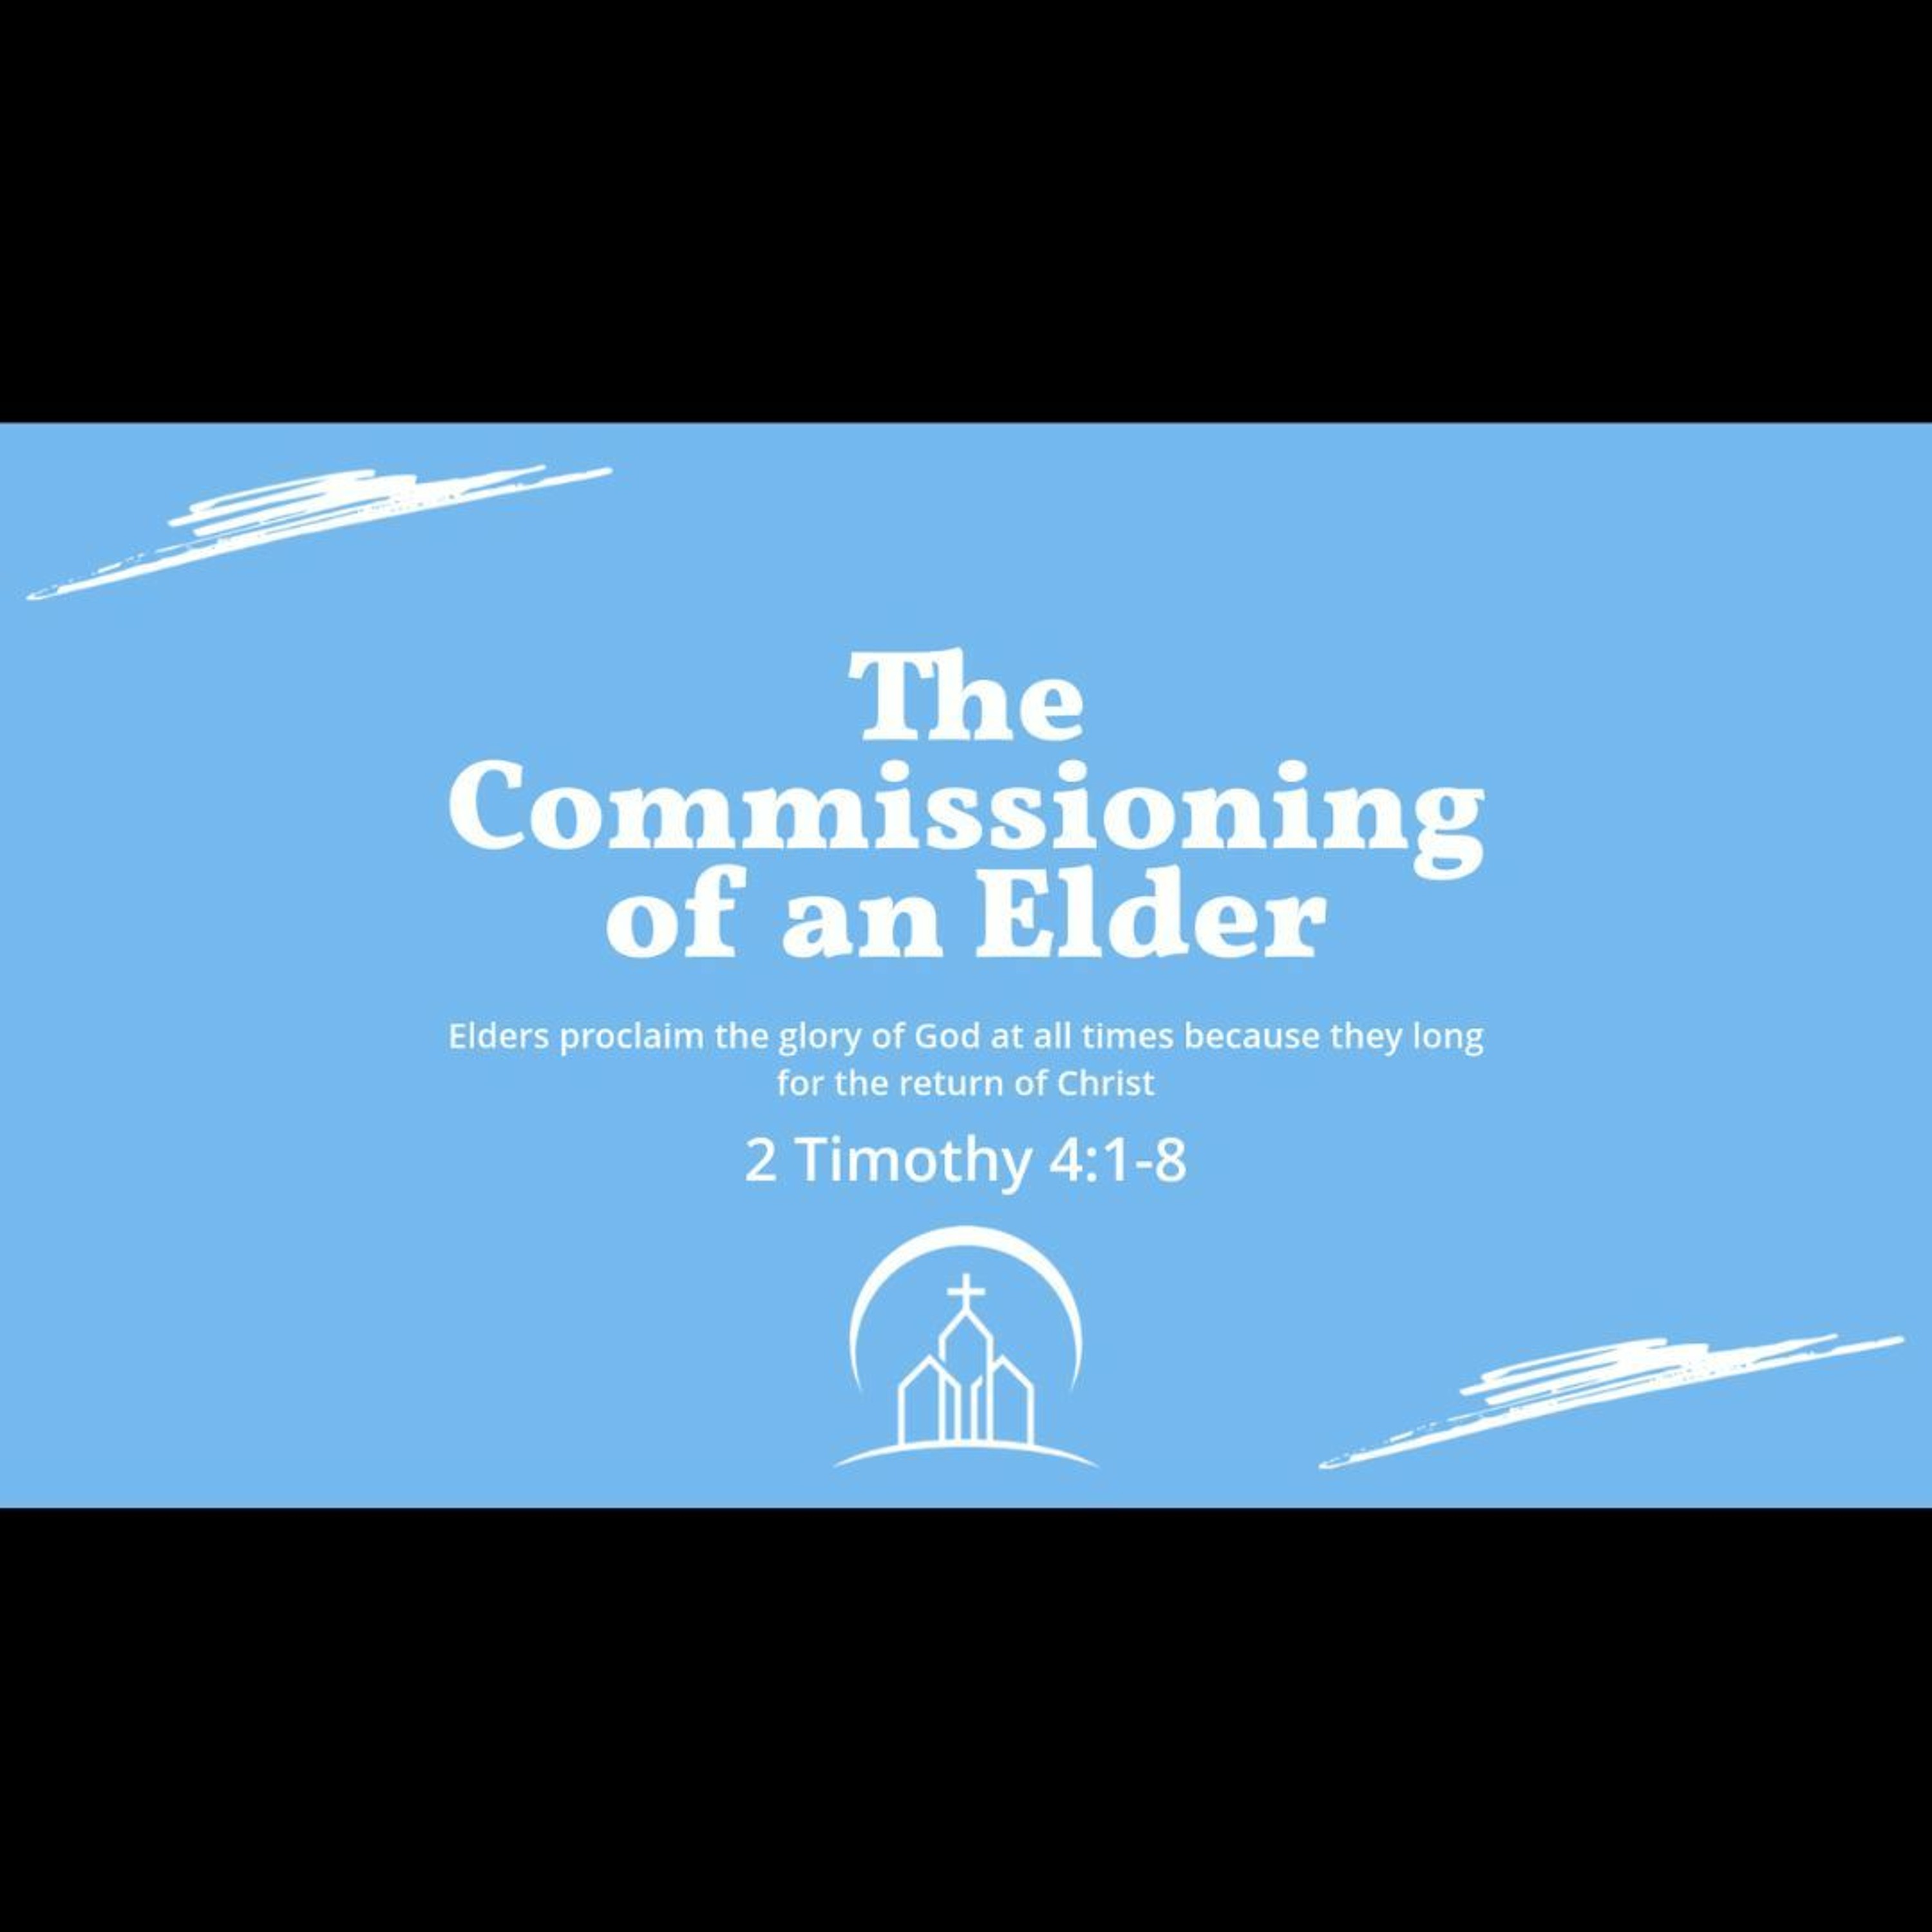 The Commissioning of an Elder (2 Timothy 4:1-8)